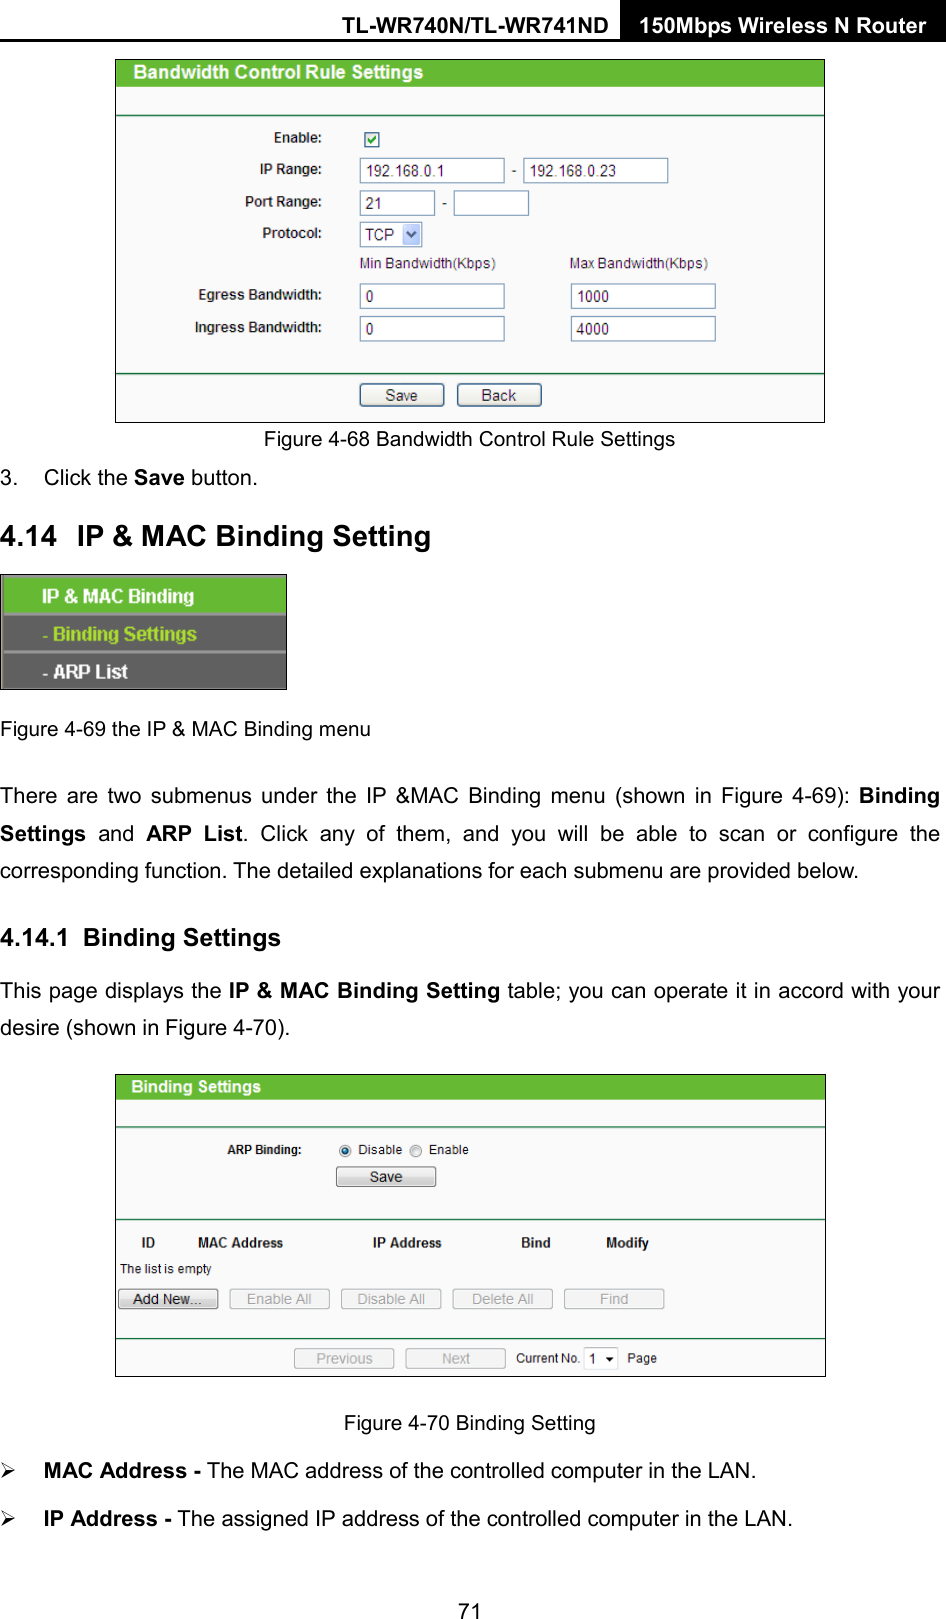 TL-WR740N/TL-WR741ND 150Mbps Wireless N Router   Figure 4-68 Bandwidth Control Rule Settings 3. Click the Save button. 4.14 IP &amp; MAC Binding Setting  Figure 4-69 the IP &amp; MAC Binding menu There are two submenus under the IP &amp;MAC Binding menu (shown in Figure  4-69):  Binding Settings  and ARP List. Click any of them, and you will be able to scan or configure the corresponding function. The detailed explanations for each submenu are provided below. 4.14.1 Binding Settings This page displays the IP &amp; MAC Binding Setting table; you can operate it in accord with your desire (shown in Figure 4-70).    Figure 4-70 Binding Setting  MAC Address - The MAC address of the controlled computer in the LAN.    IP Address - The assigned IP address of the controlled computer in the LAN.   71 